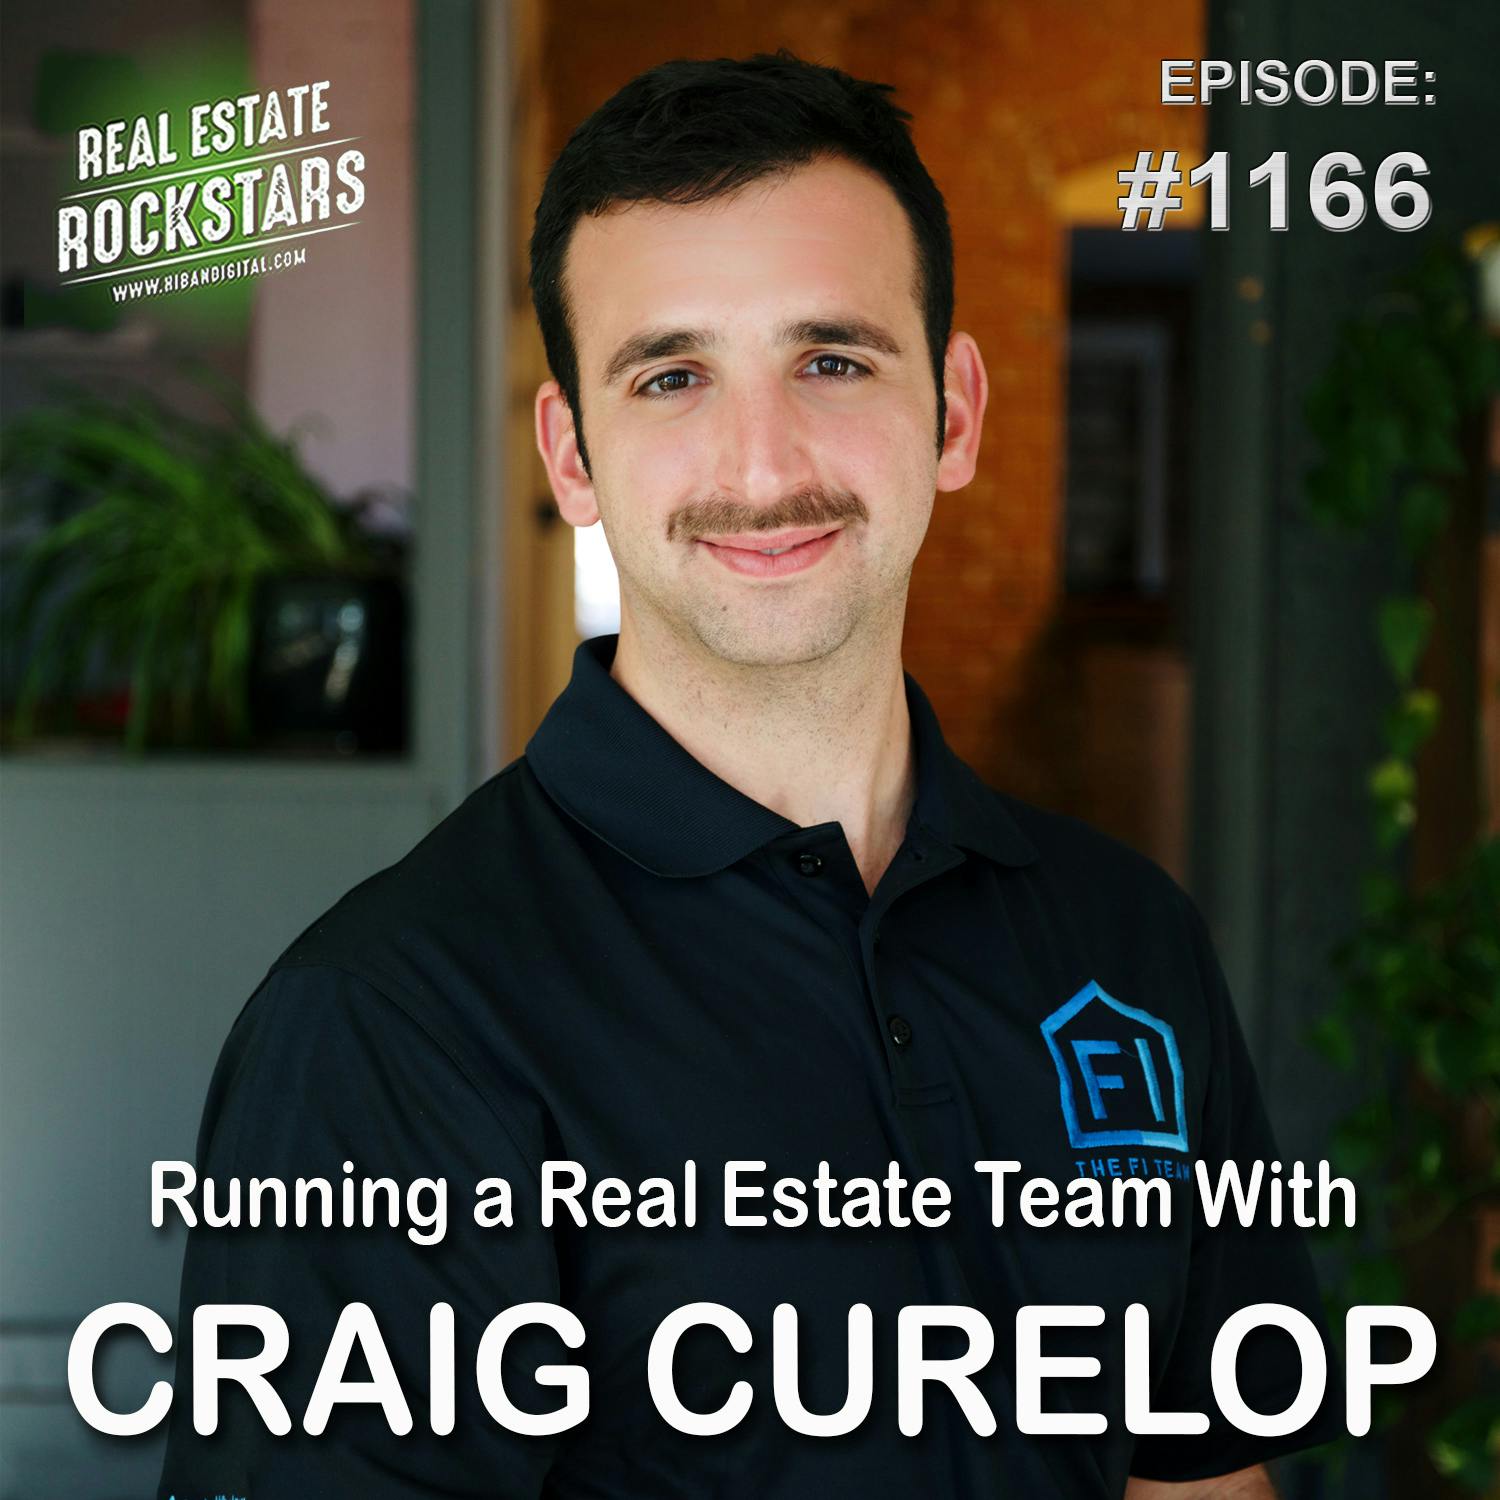 1166: Running a Real Estate Team With Craig Curelop